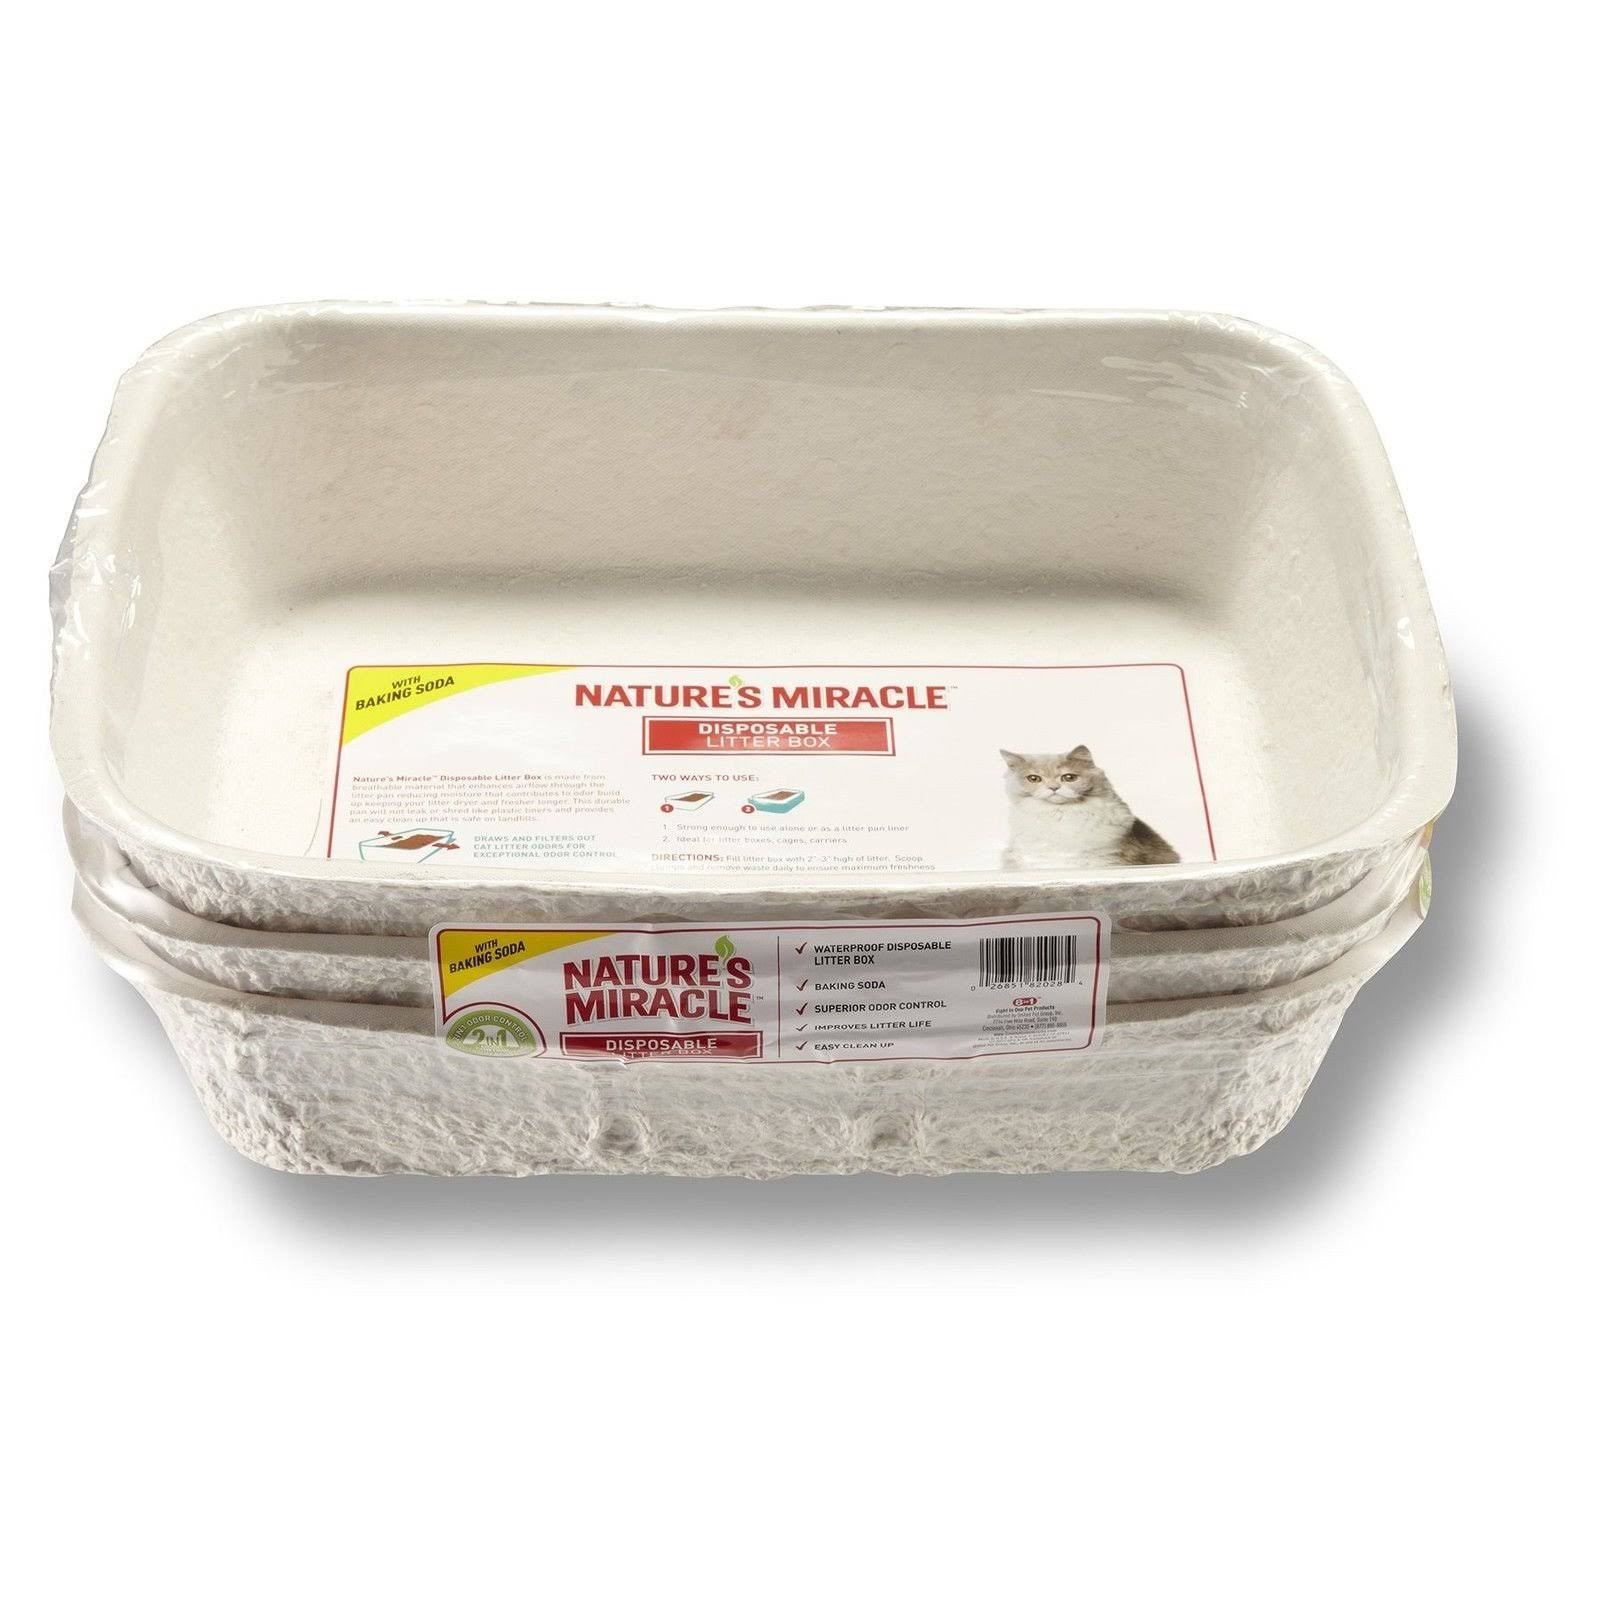 Nature's Miracle Disposable Litter Box - Regular, 3 Pack